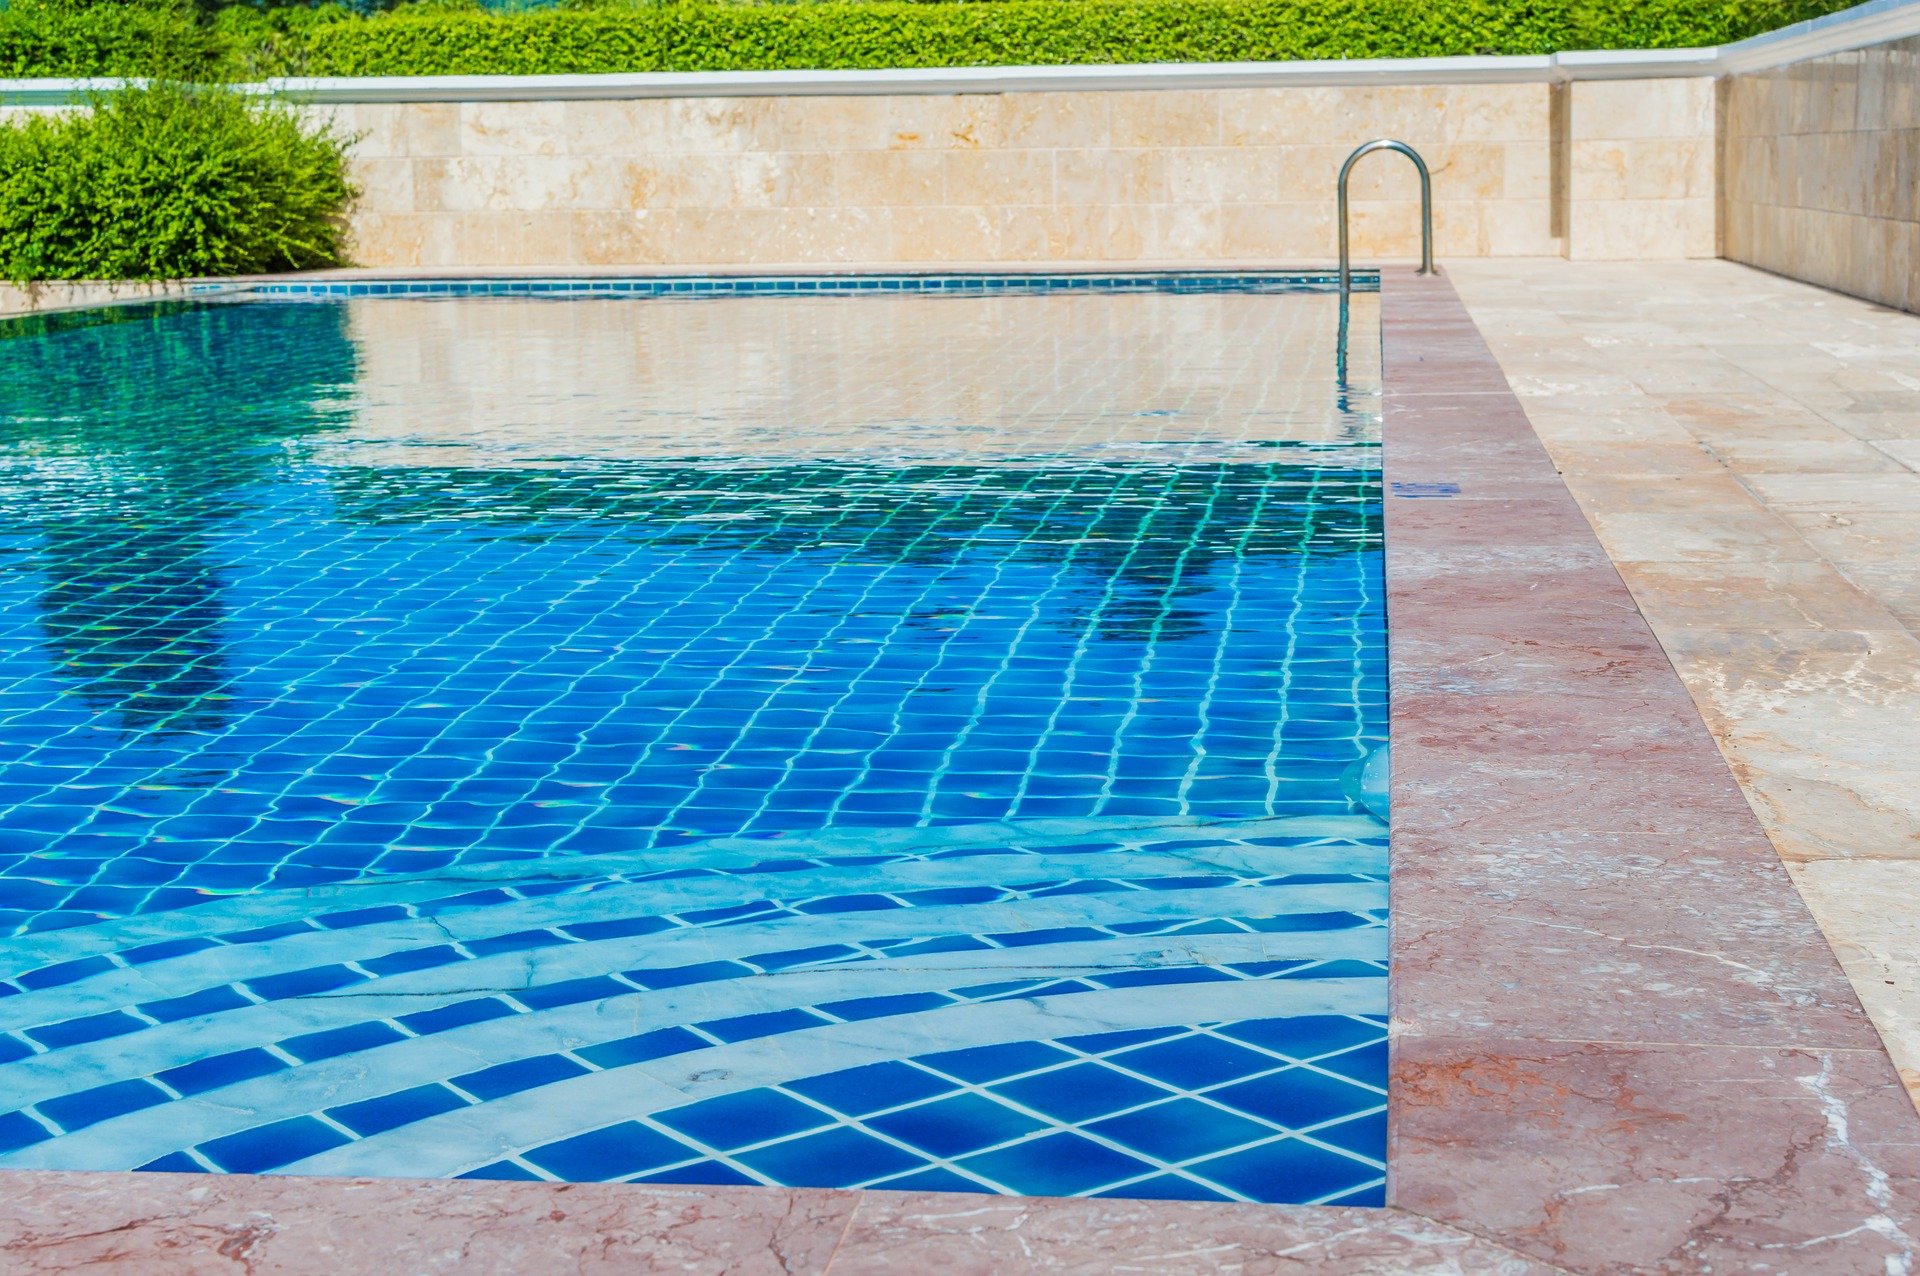 Concrete swimming pool - is a concrete pool right for you?